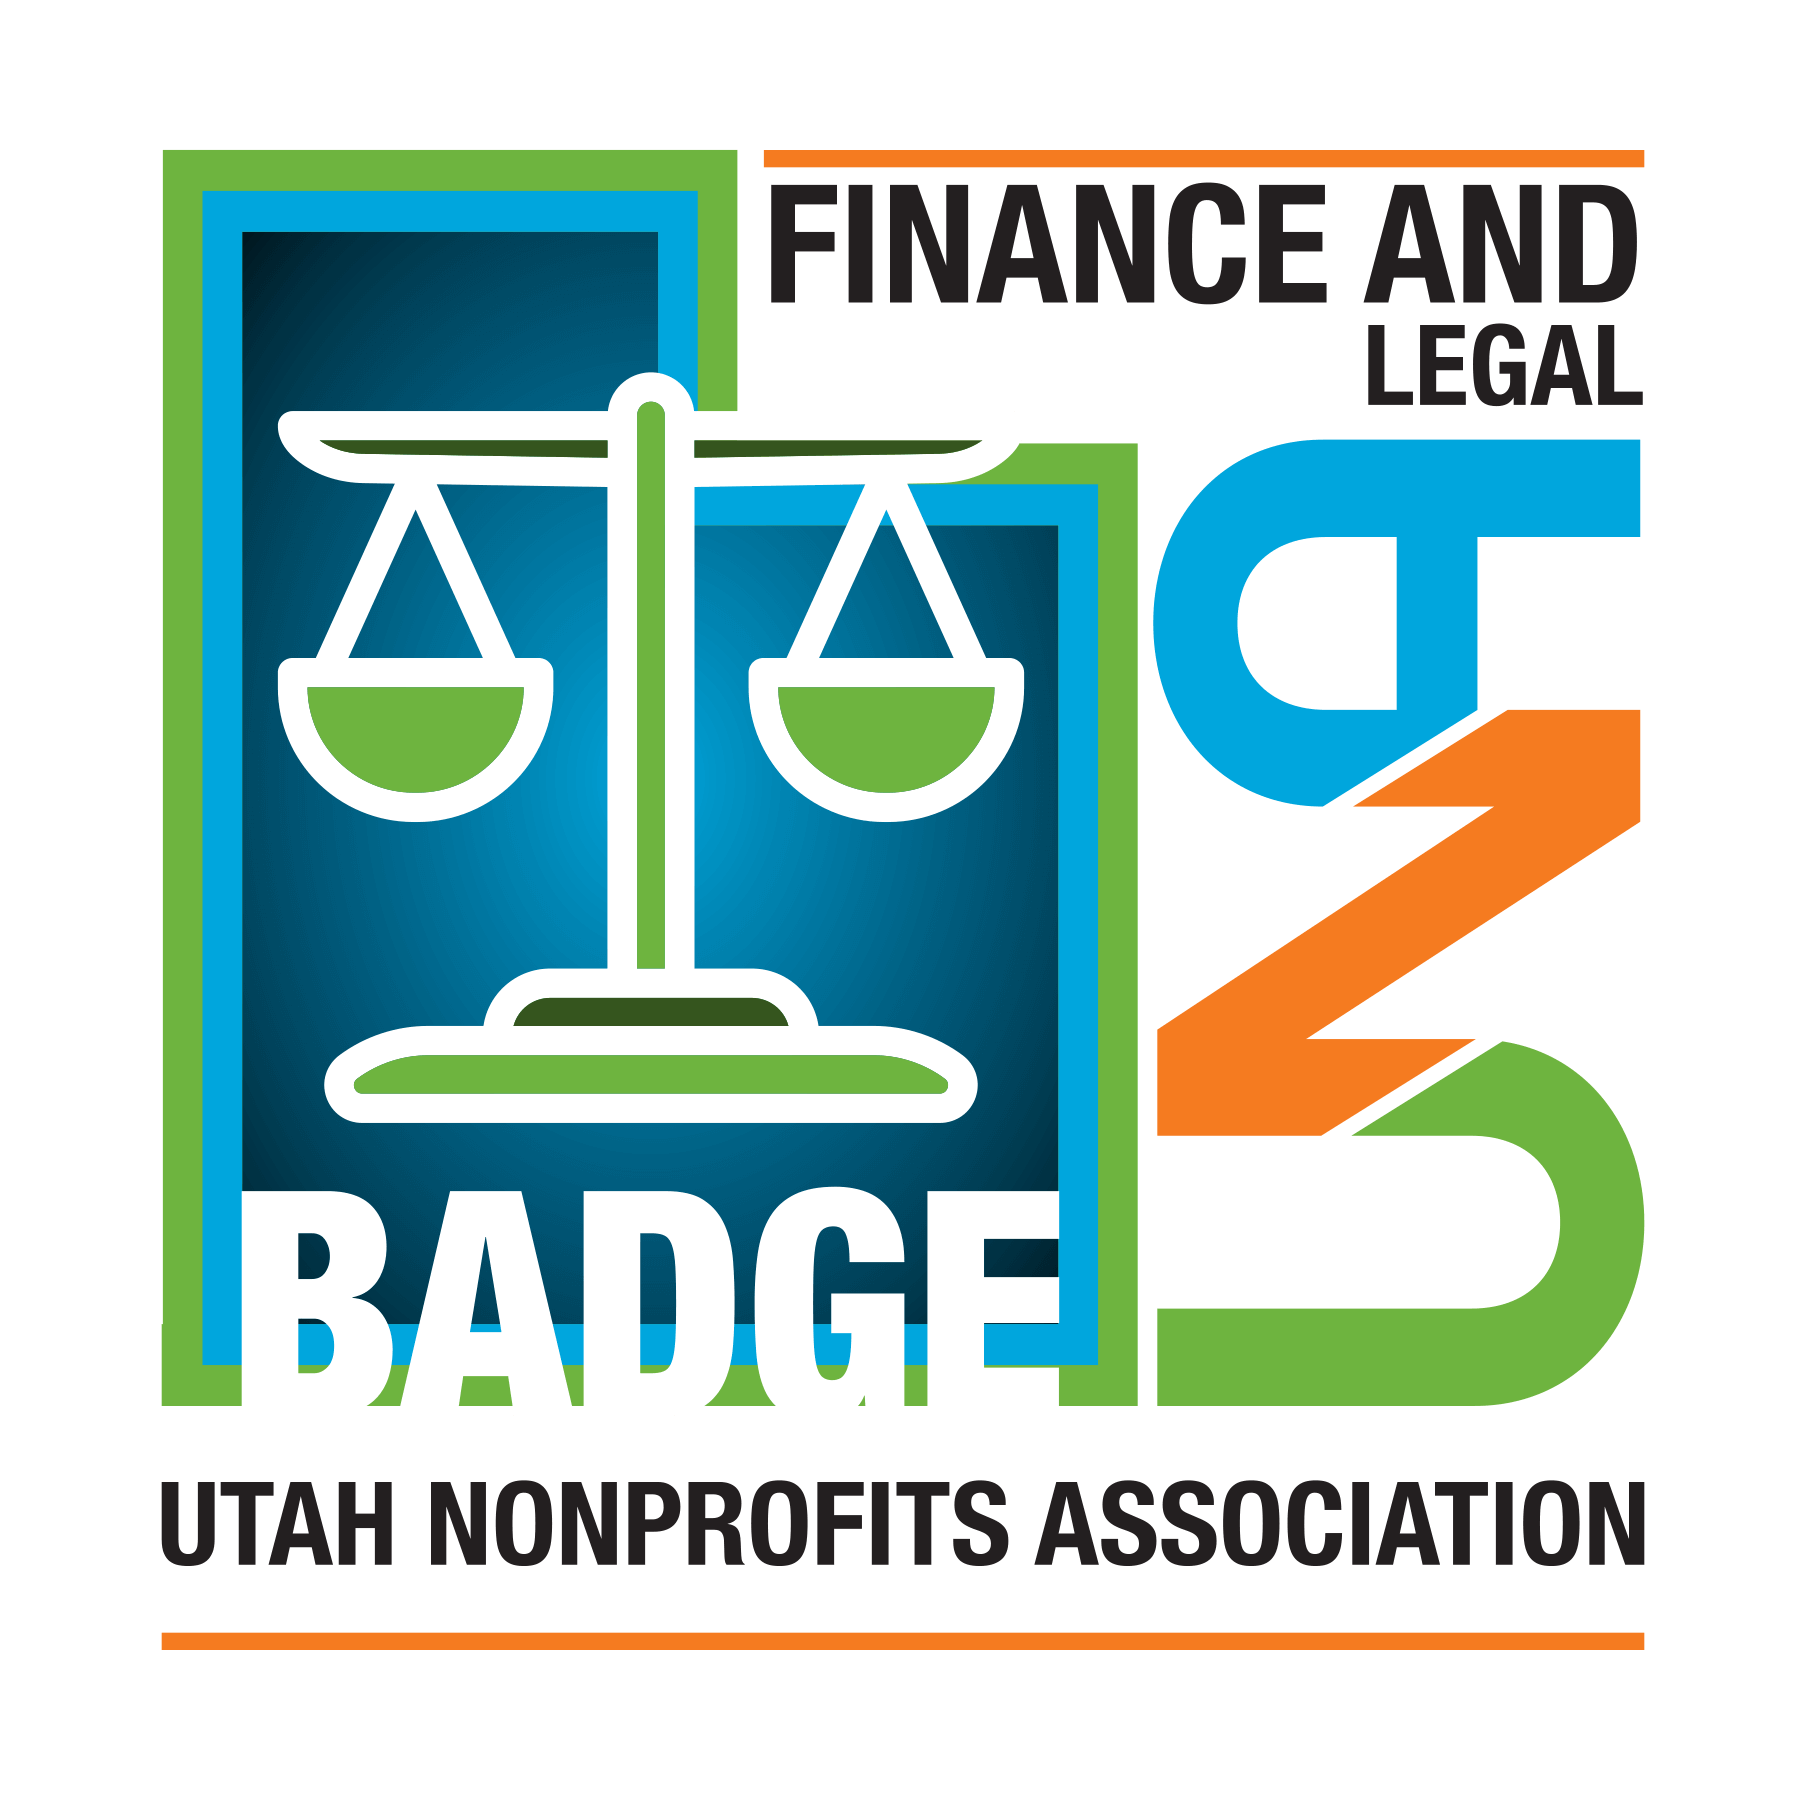 UNA Nonprofit Credential Badge for Finance and Legal